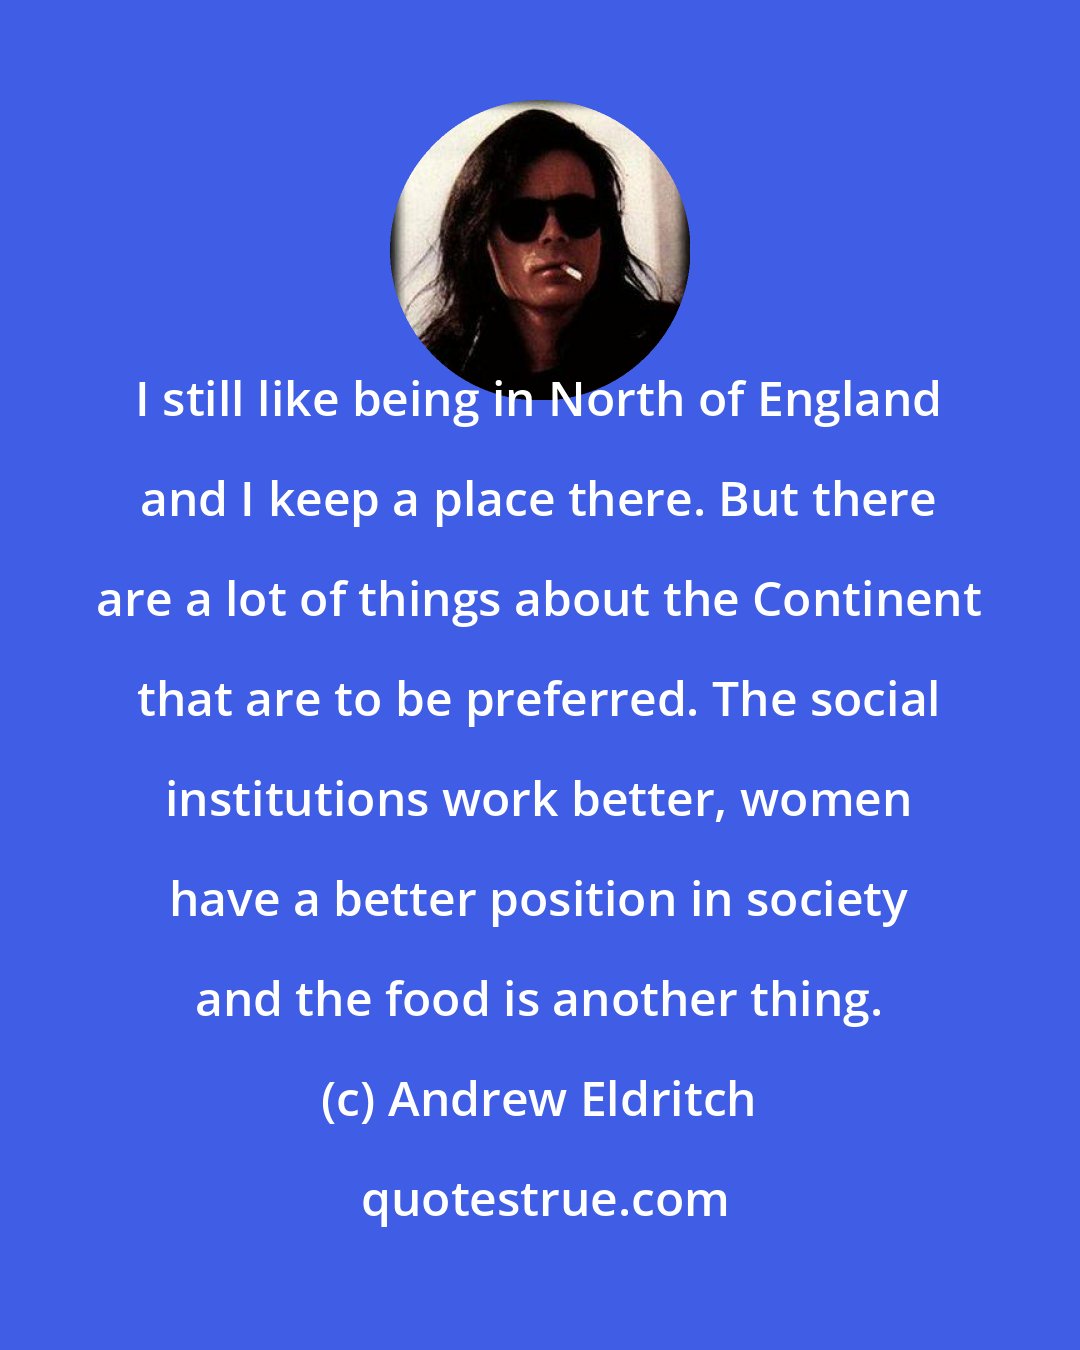 Andrew Eldritch: I still like being in North of England and I keep a place there. But there are a lot of things about the Continent that are to be preferred. The social institutions work better, women have a better position in society and the food is another thing.